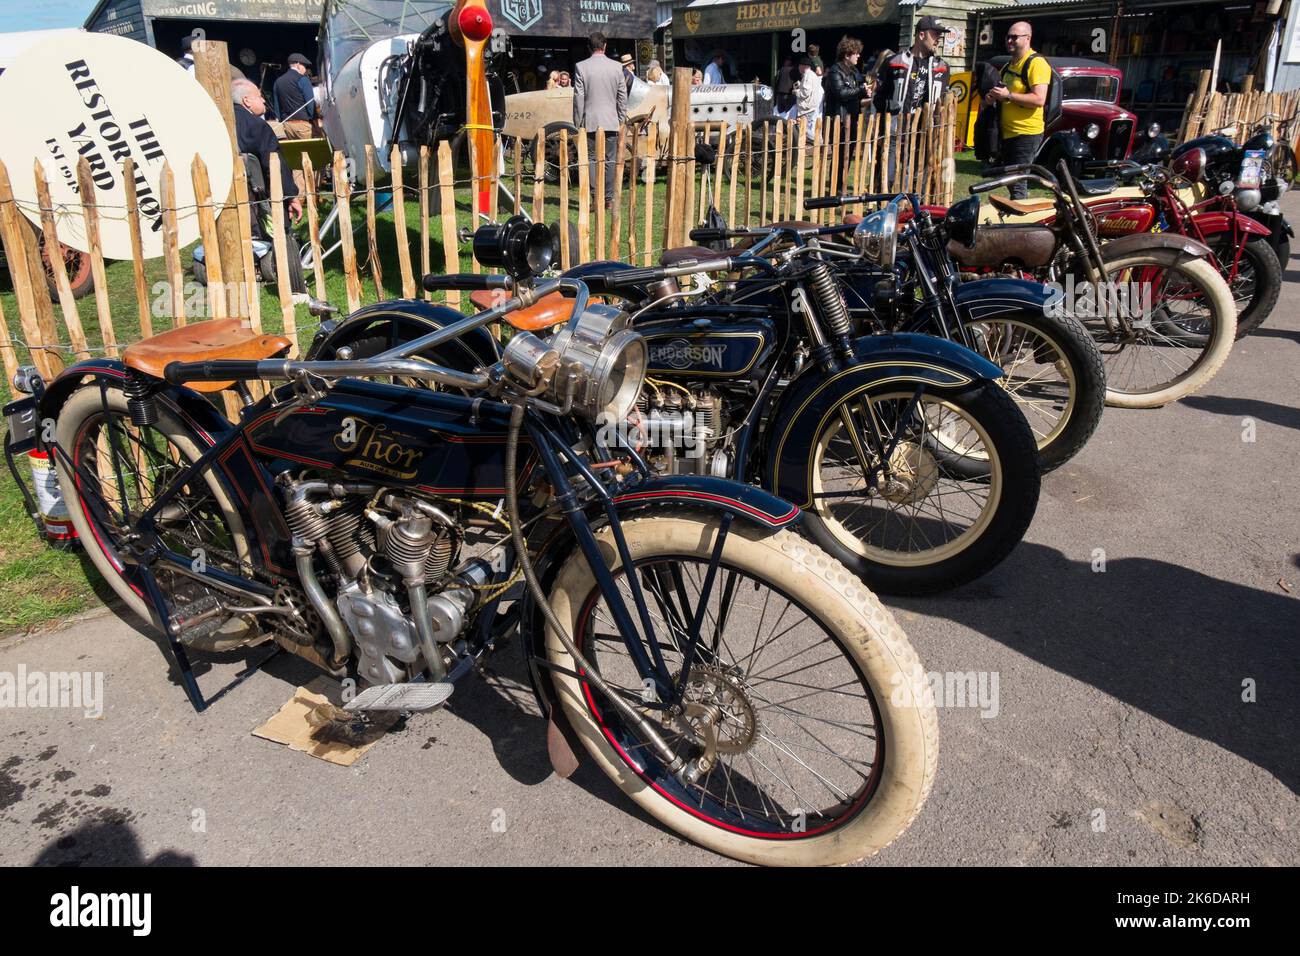 Thor, Henderson and Indian American motorcycles parked at the Restoration Yard, BARC Revival Meeting, Goodwood motor racing circuit, Chichester, UK Stock Photo